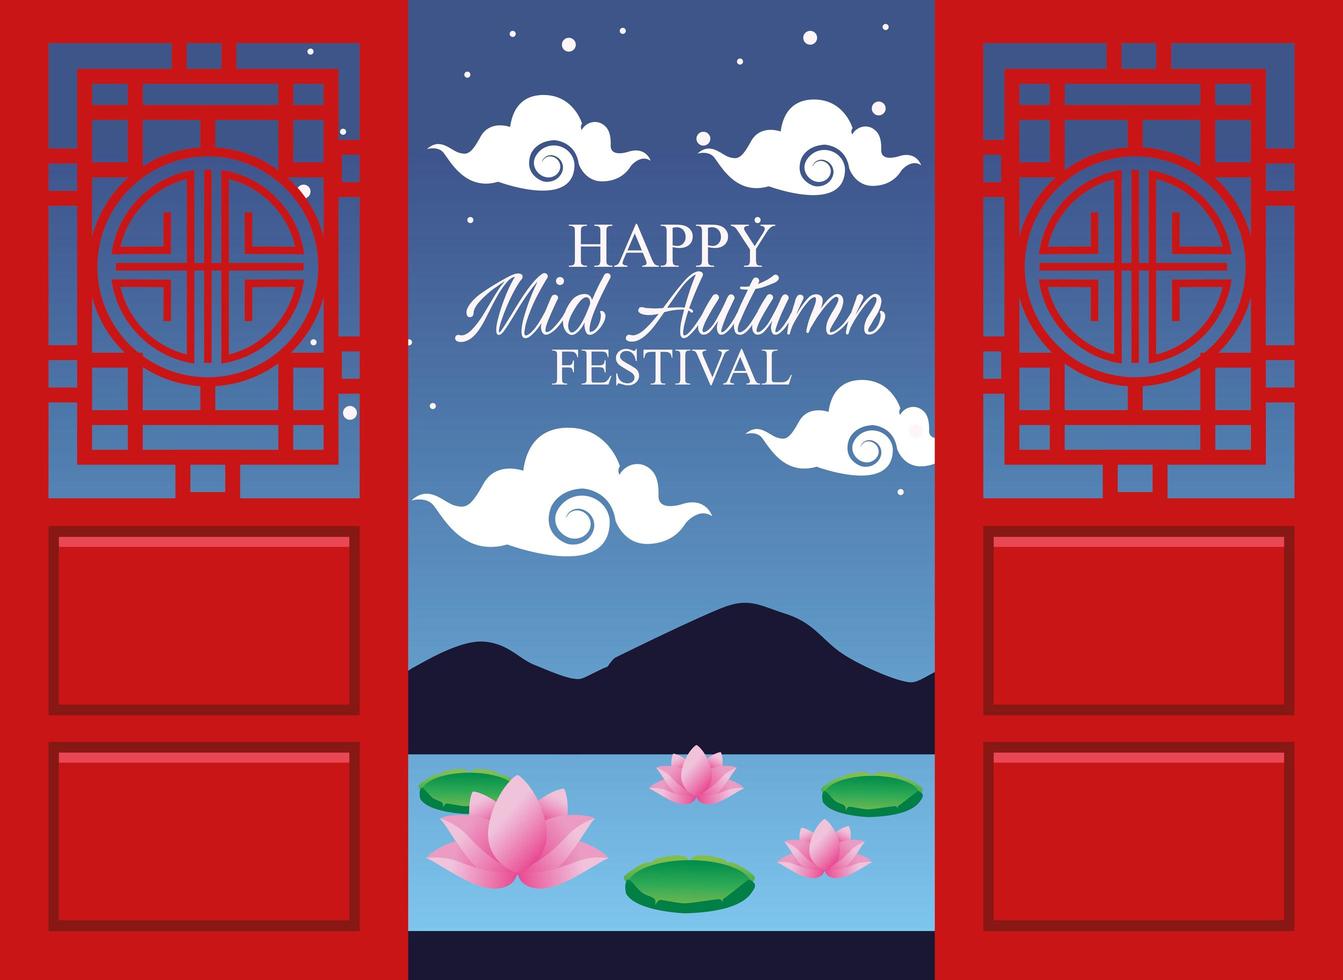 happy mid autumn festival card with lake and clouds scene vector